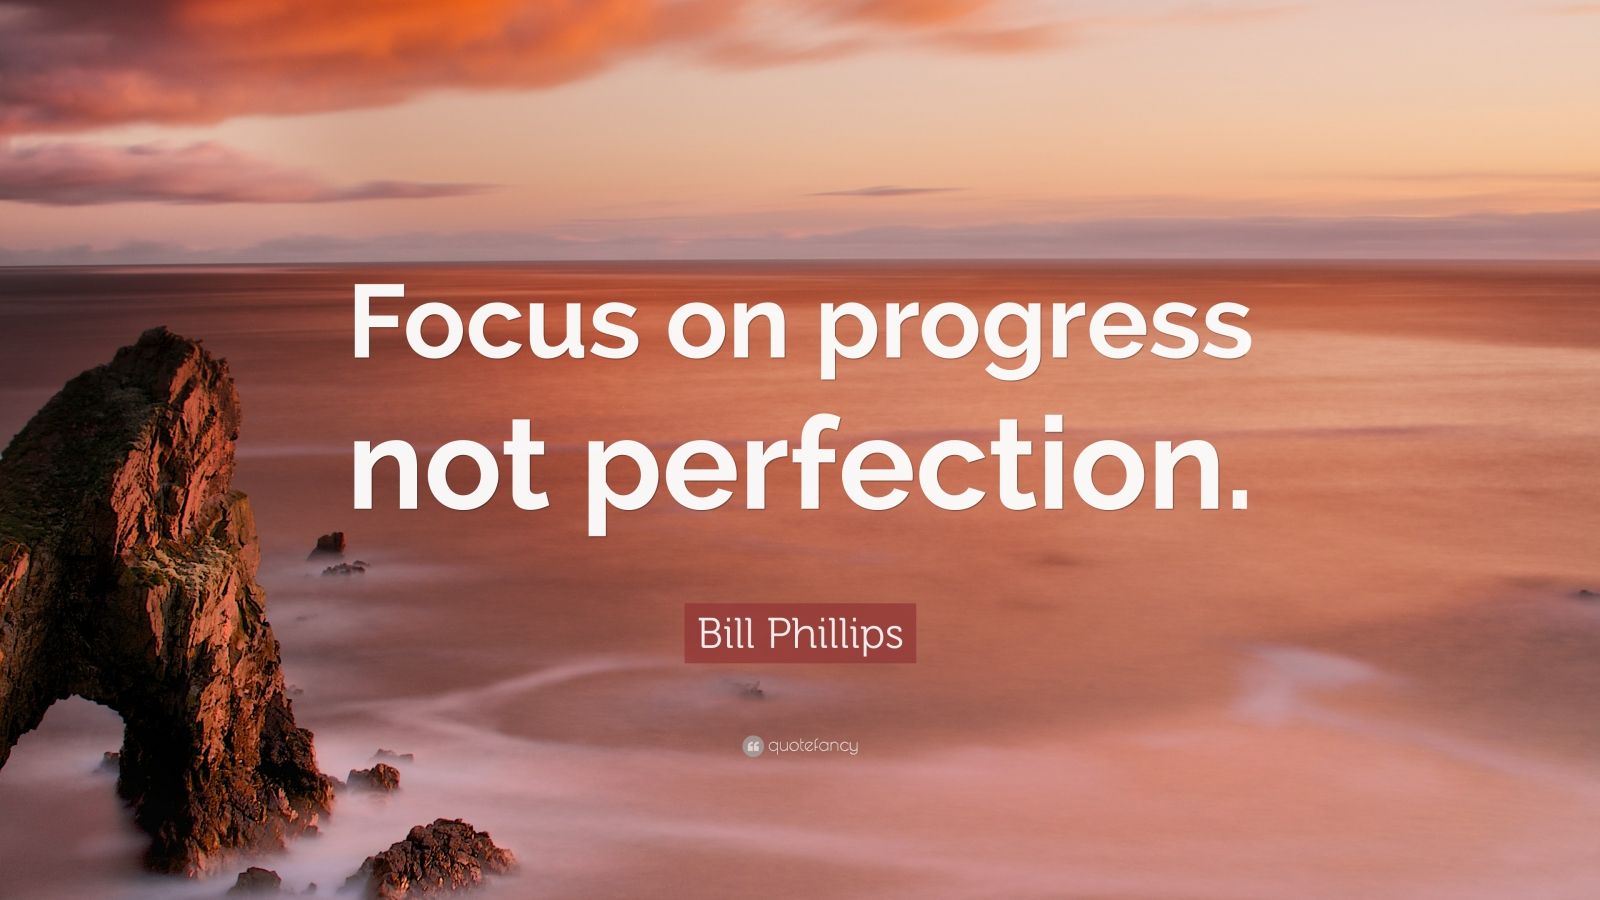 Bill Phillips Quote: “Focus on progress not perfection.” (9 wallpapers